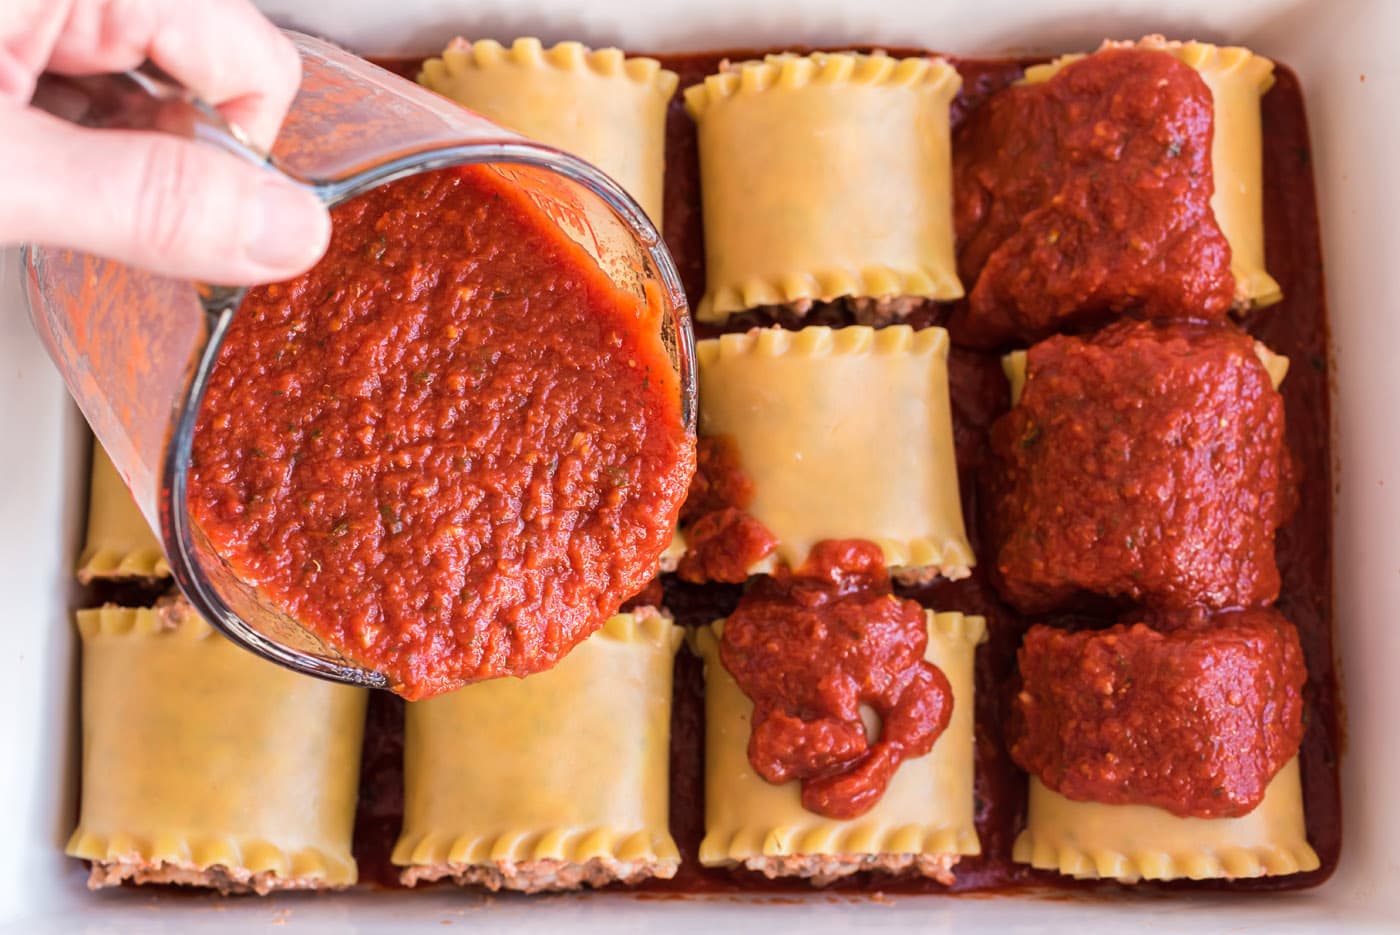 pouring sauce over lasagna roll ups in a dish